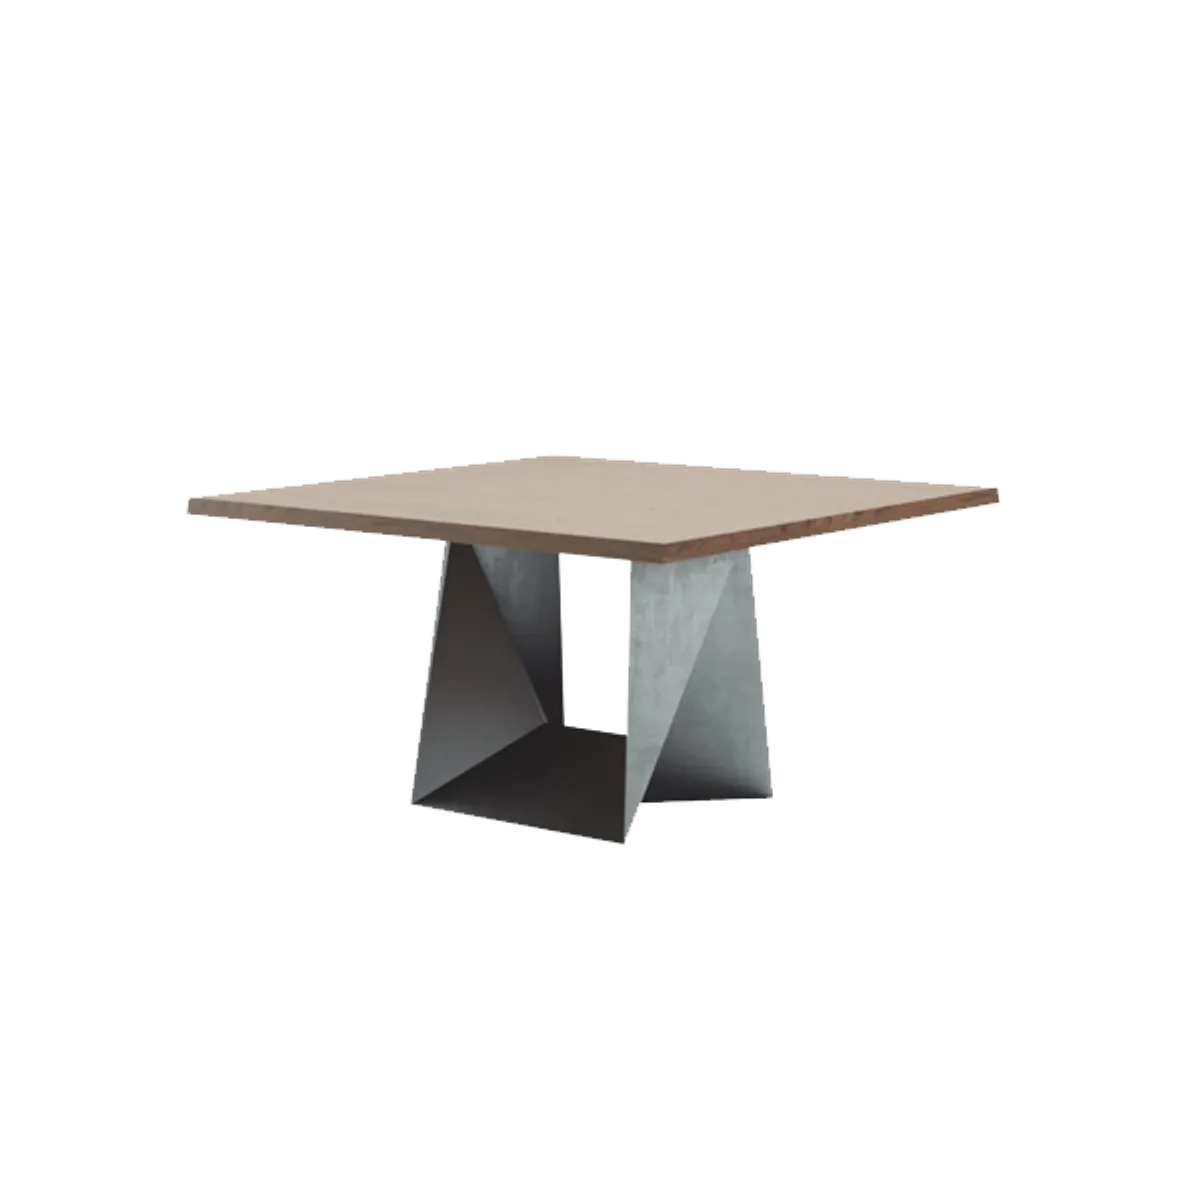 Flint square table Inside Out Contracts copy